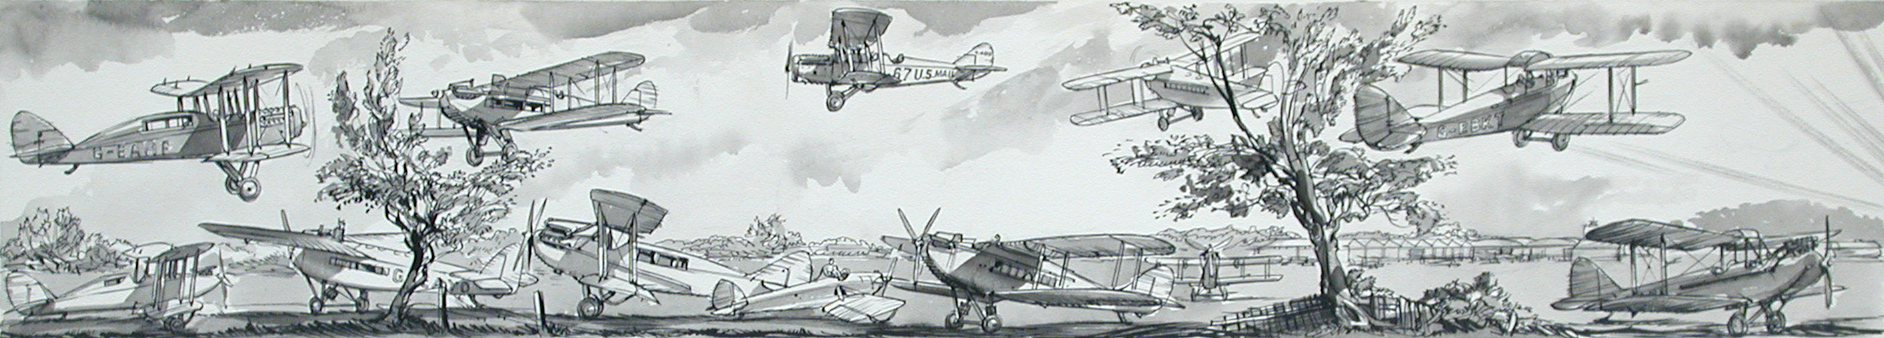 Attributed to Frank Wooton. De Havilland Aircraft Company Public Relations Department - Original - Image 6 of 6